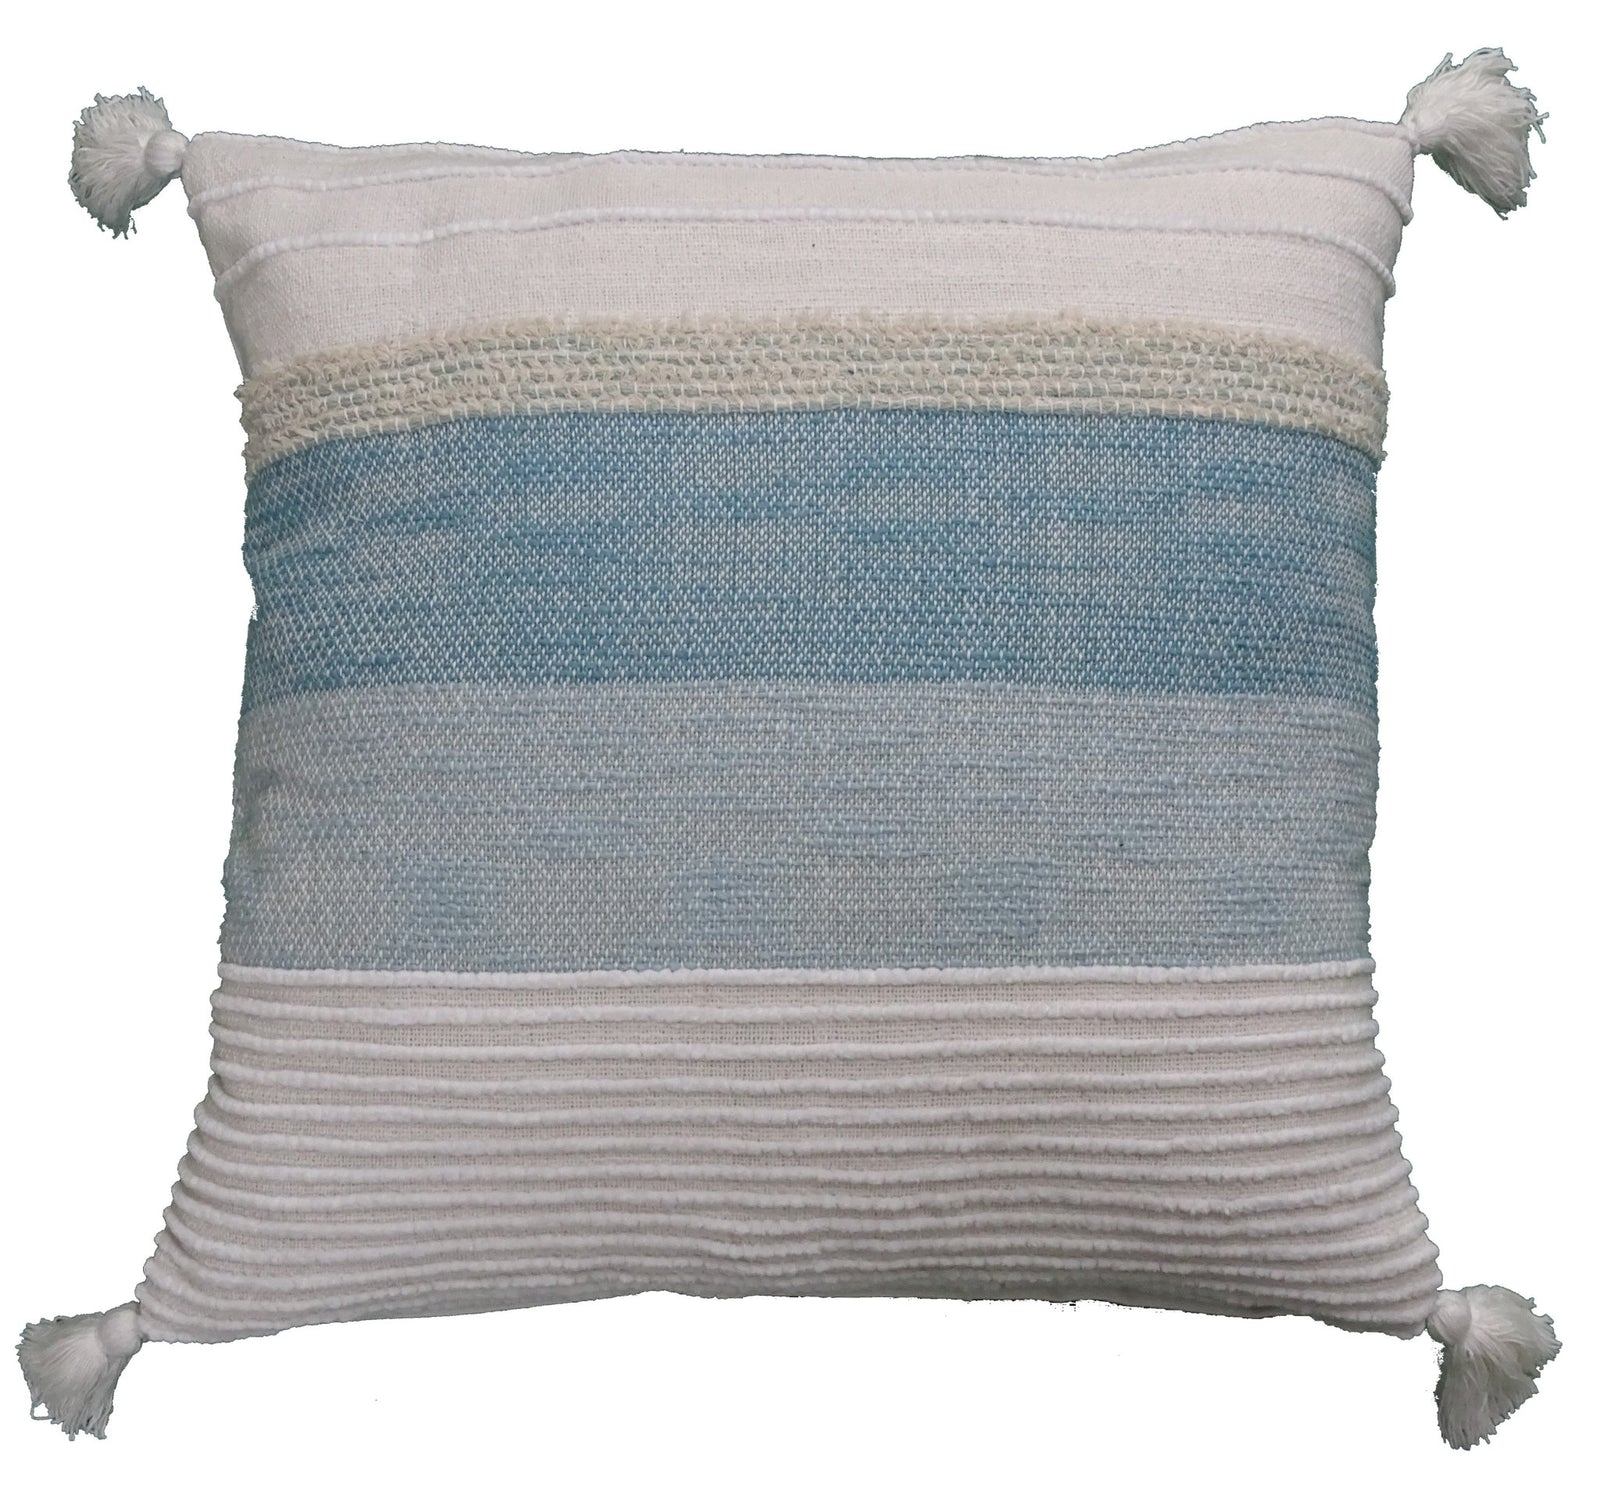 22" X 22" White And Light Blue Striped Zippered Handmade Cotton Blend Throw Pillow With Tassels